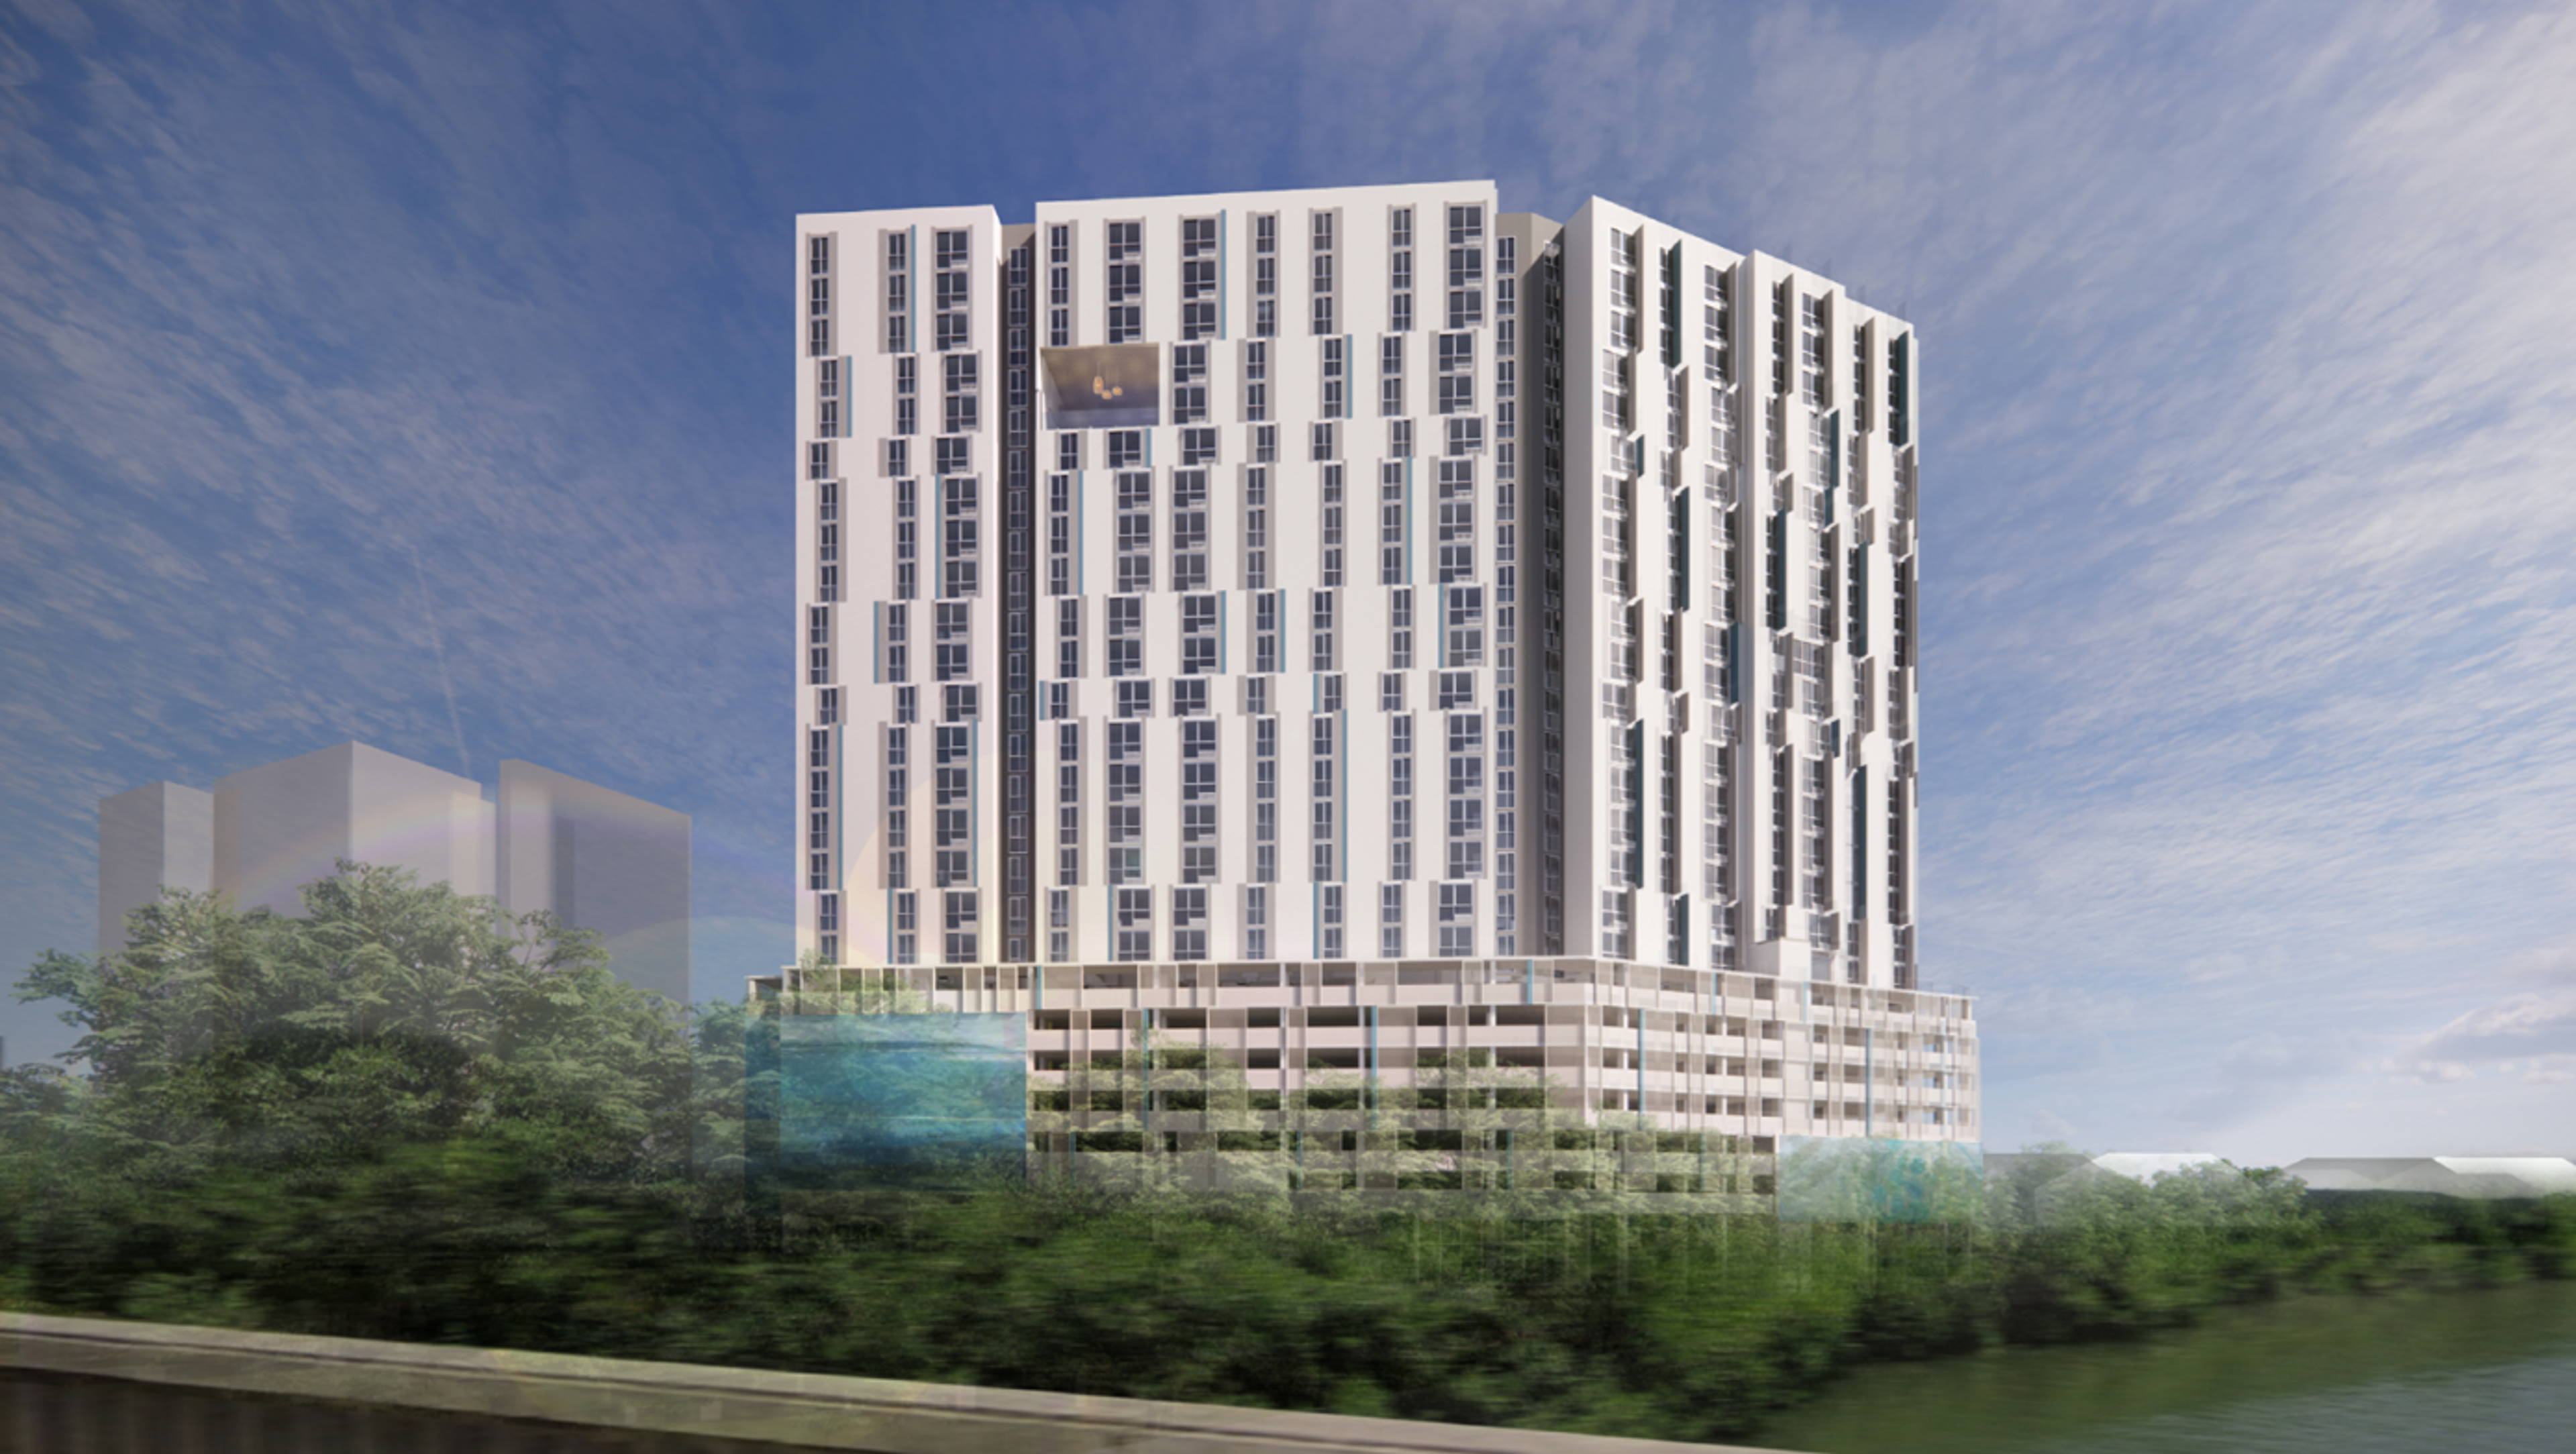 Halawa View II Apartments is a 302-unit Affordable Housing High-Rise in Halawa, HI